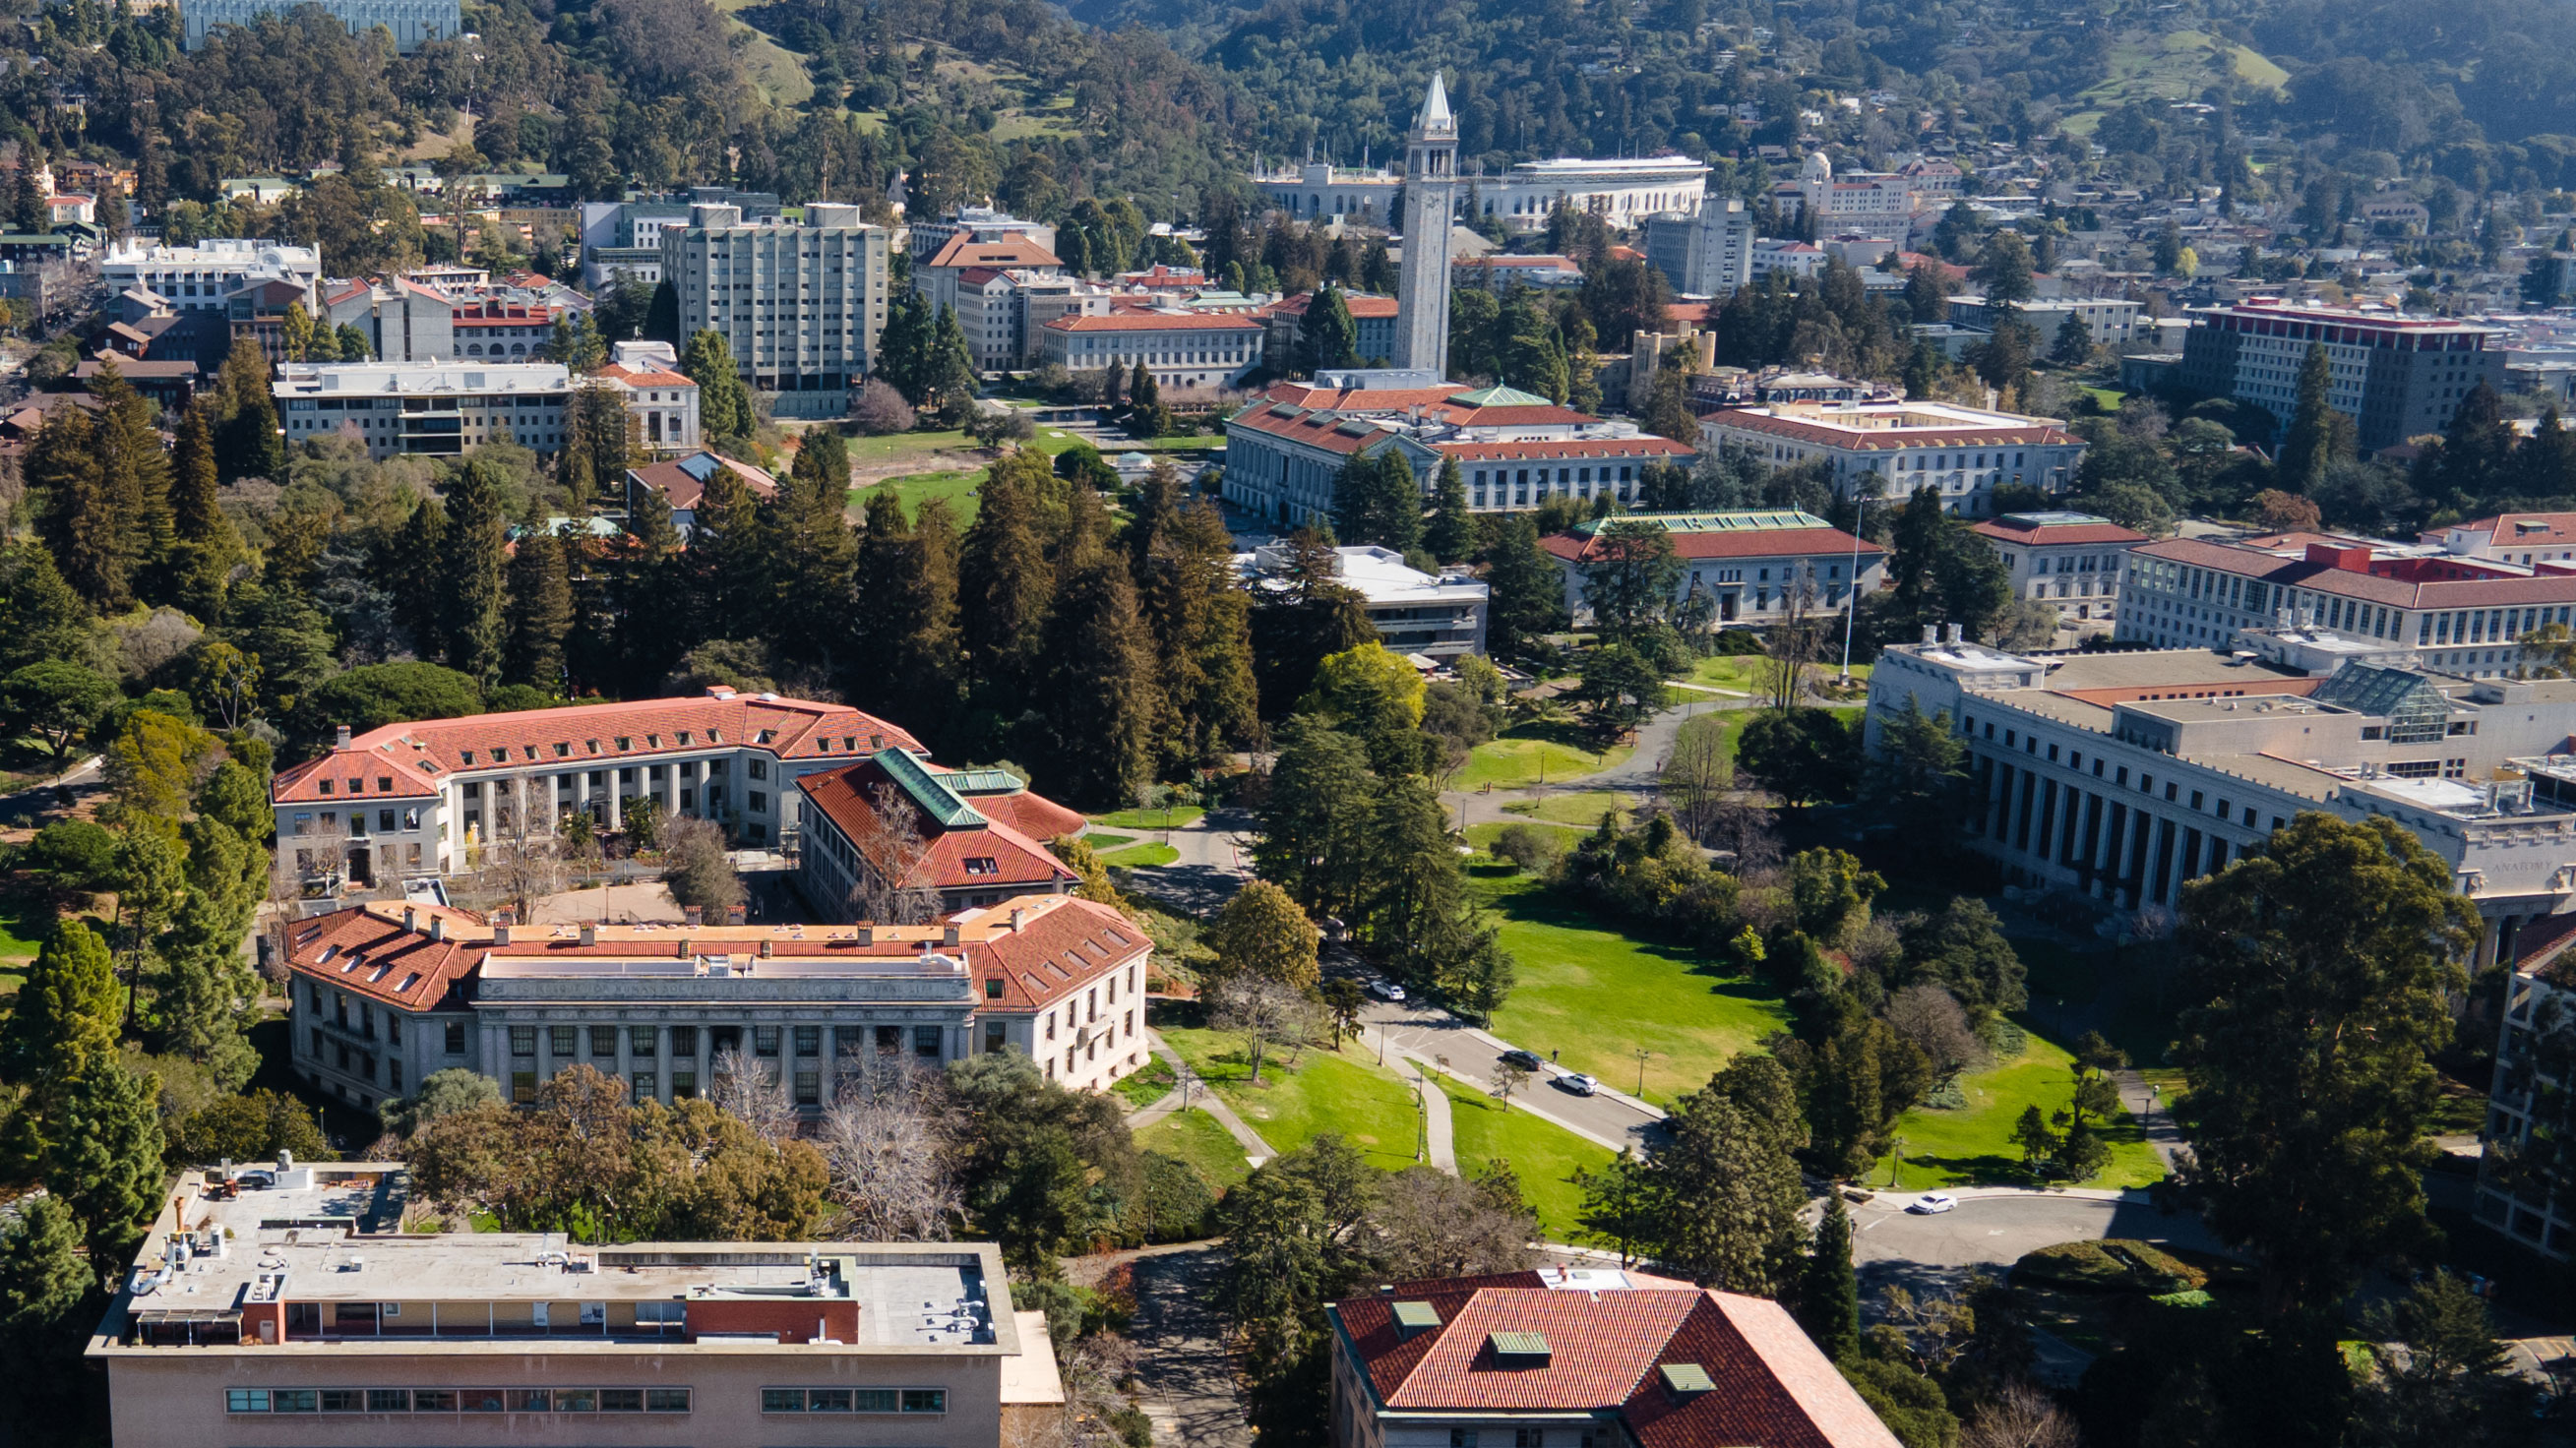 An aerial view of parts of the UC Berkeley campus